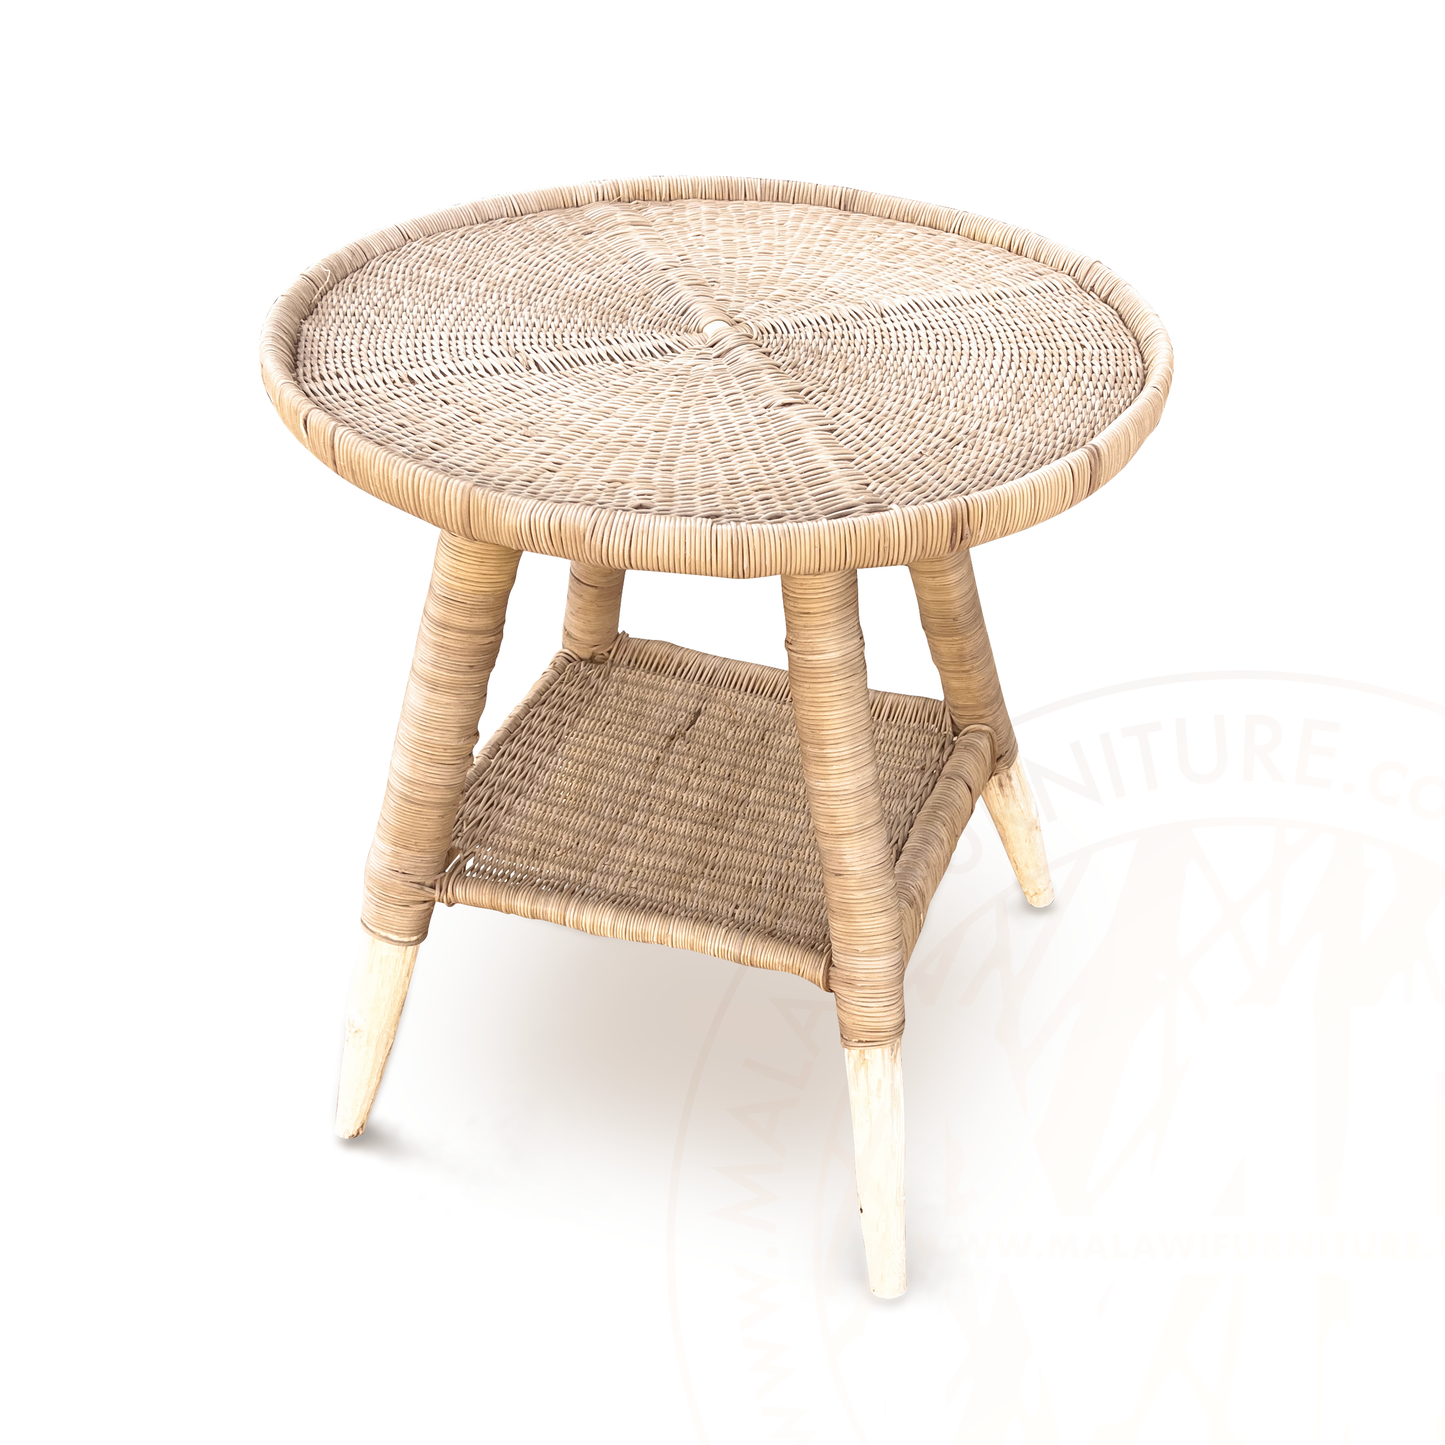 RoundTop Side table Malawi Table hand weaved woven rattan cane side table coffee